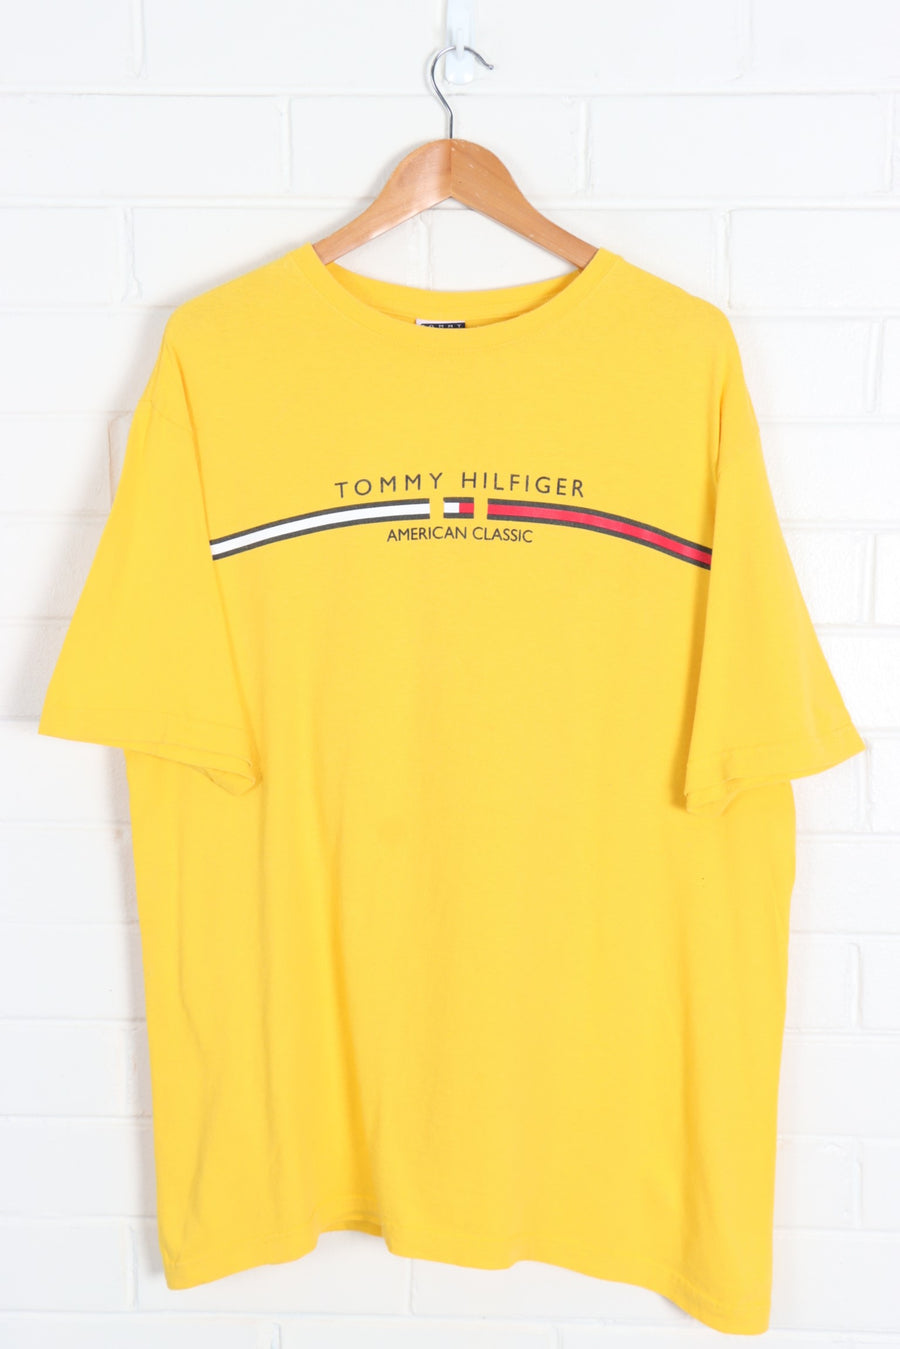 Yellow TOMMY HILFIGER 'American Classic' Graphic Tee (XL)